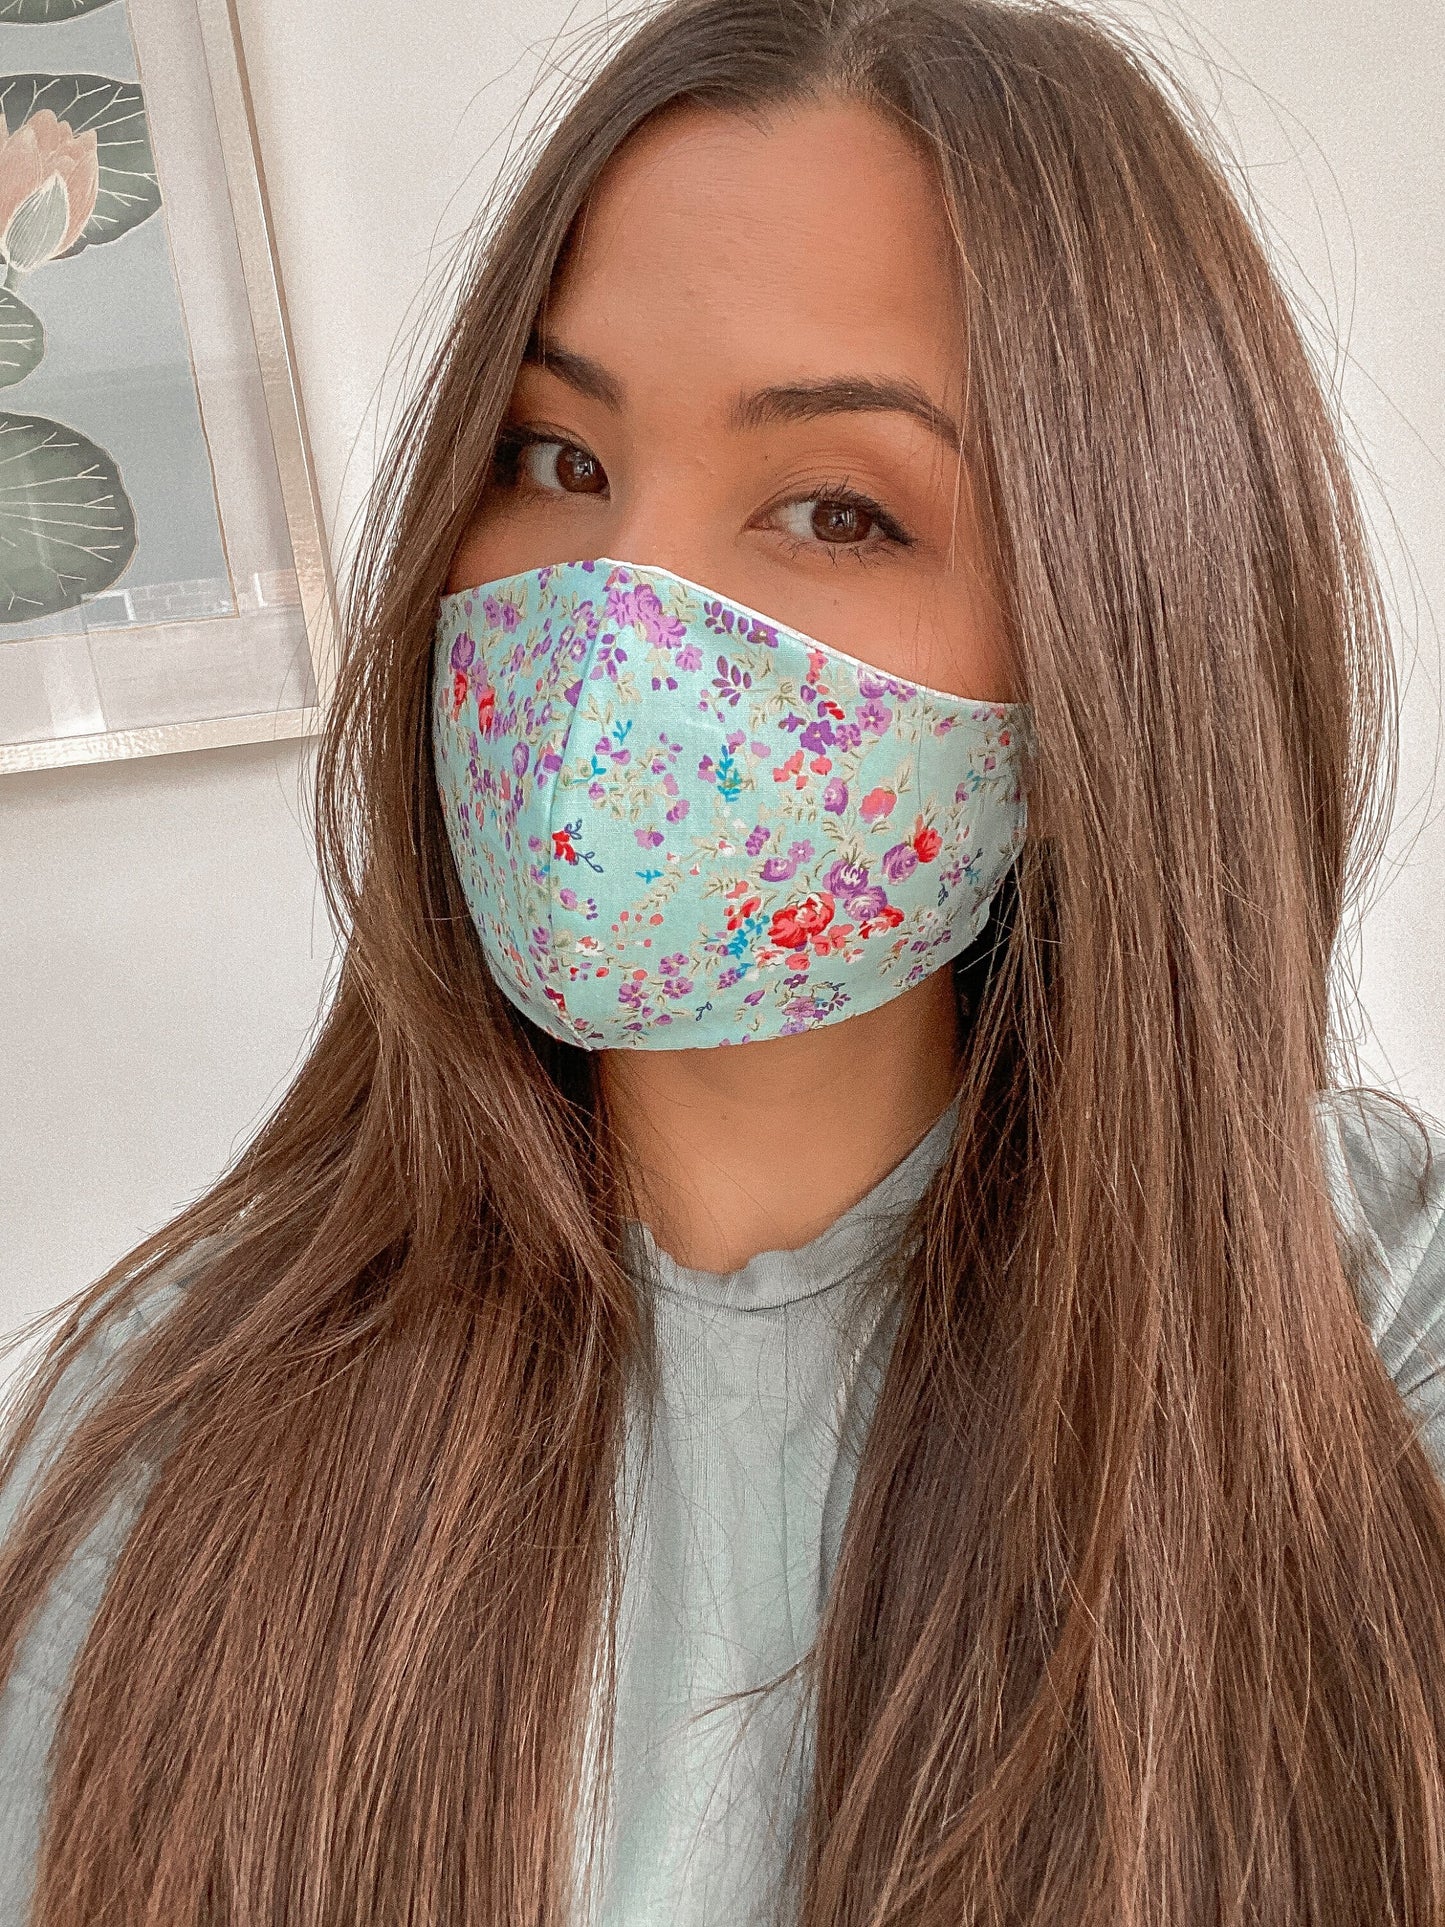 TURQUOISE FLORAL REVERSIBLE 2in1 Mask Adjustable Super Soft Elastic. Washable Reusable homemade face masks Double layer cotton made in U.K.